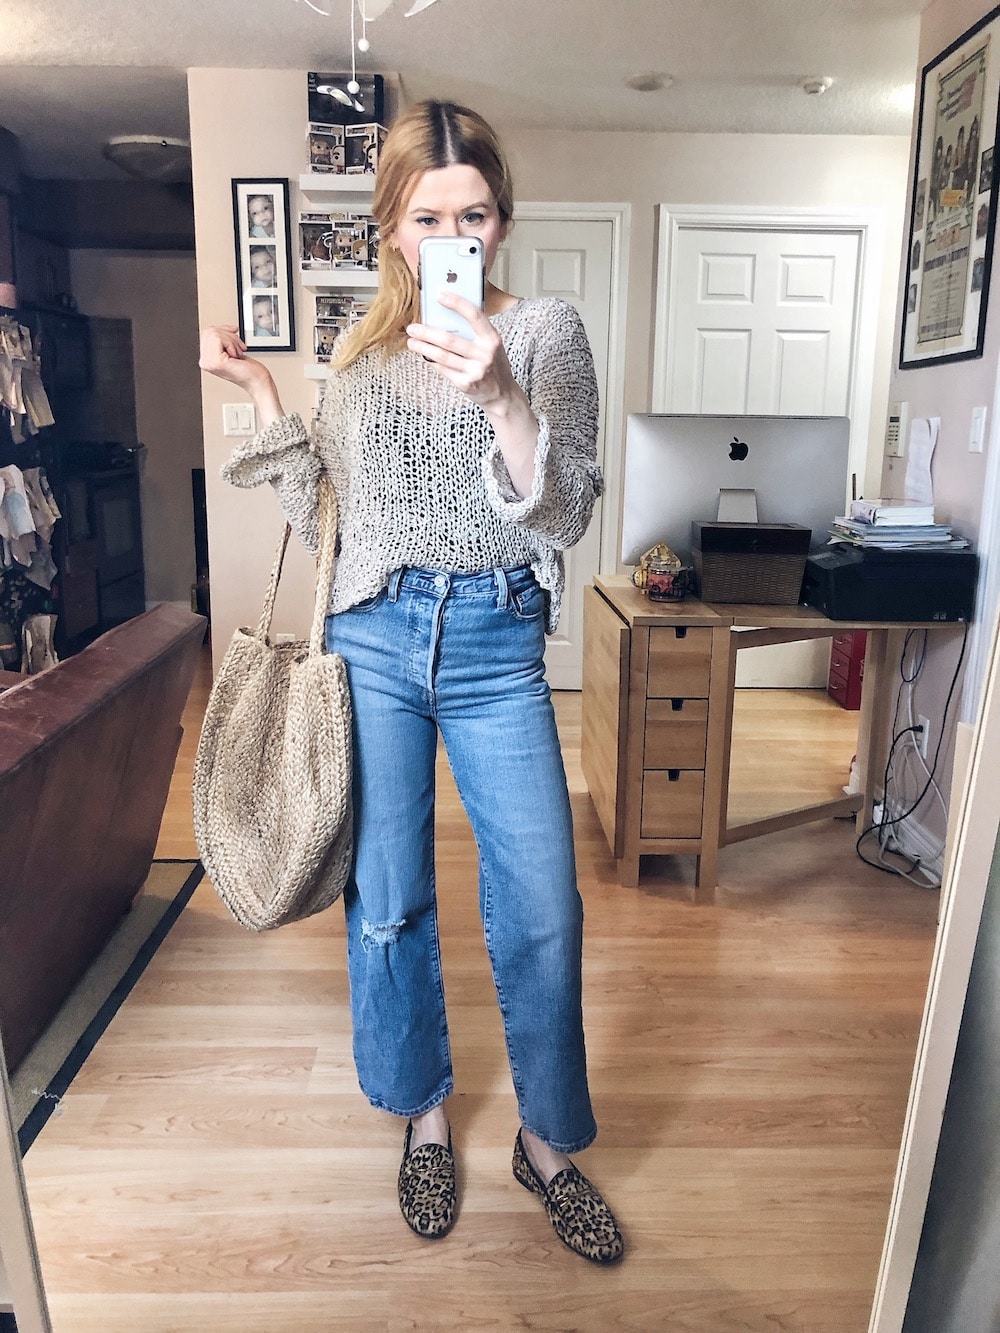 What I Wore This Week. I am Wearing an open knit seater, black camisole, Levi's Ribcage jeans, Sam Edelman Loafers, and a large circular woven bag. #livelovesara